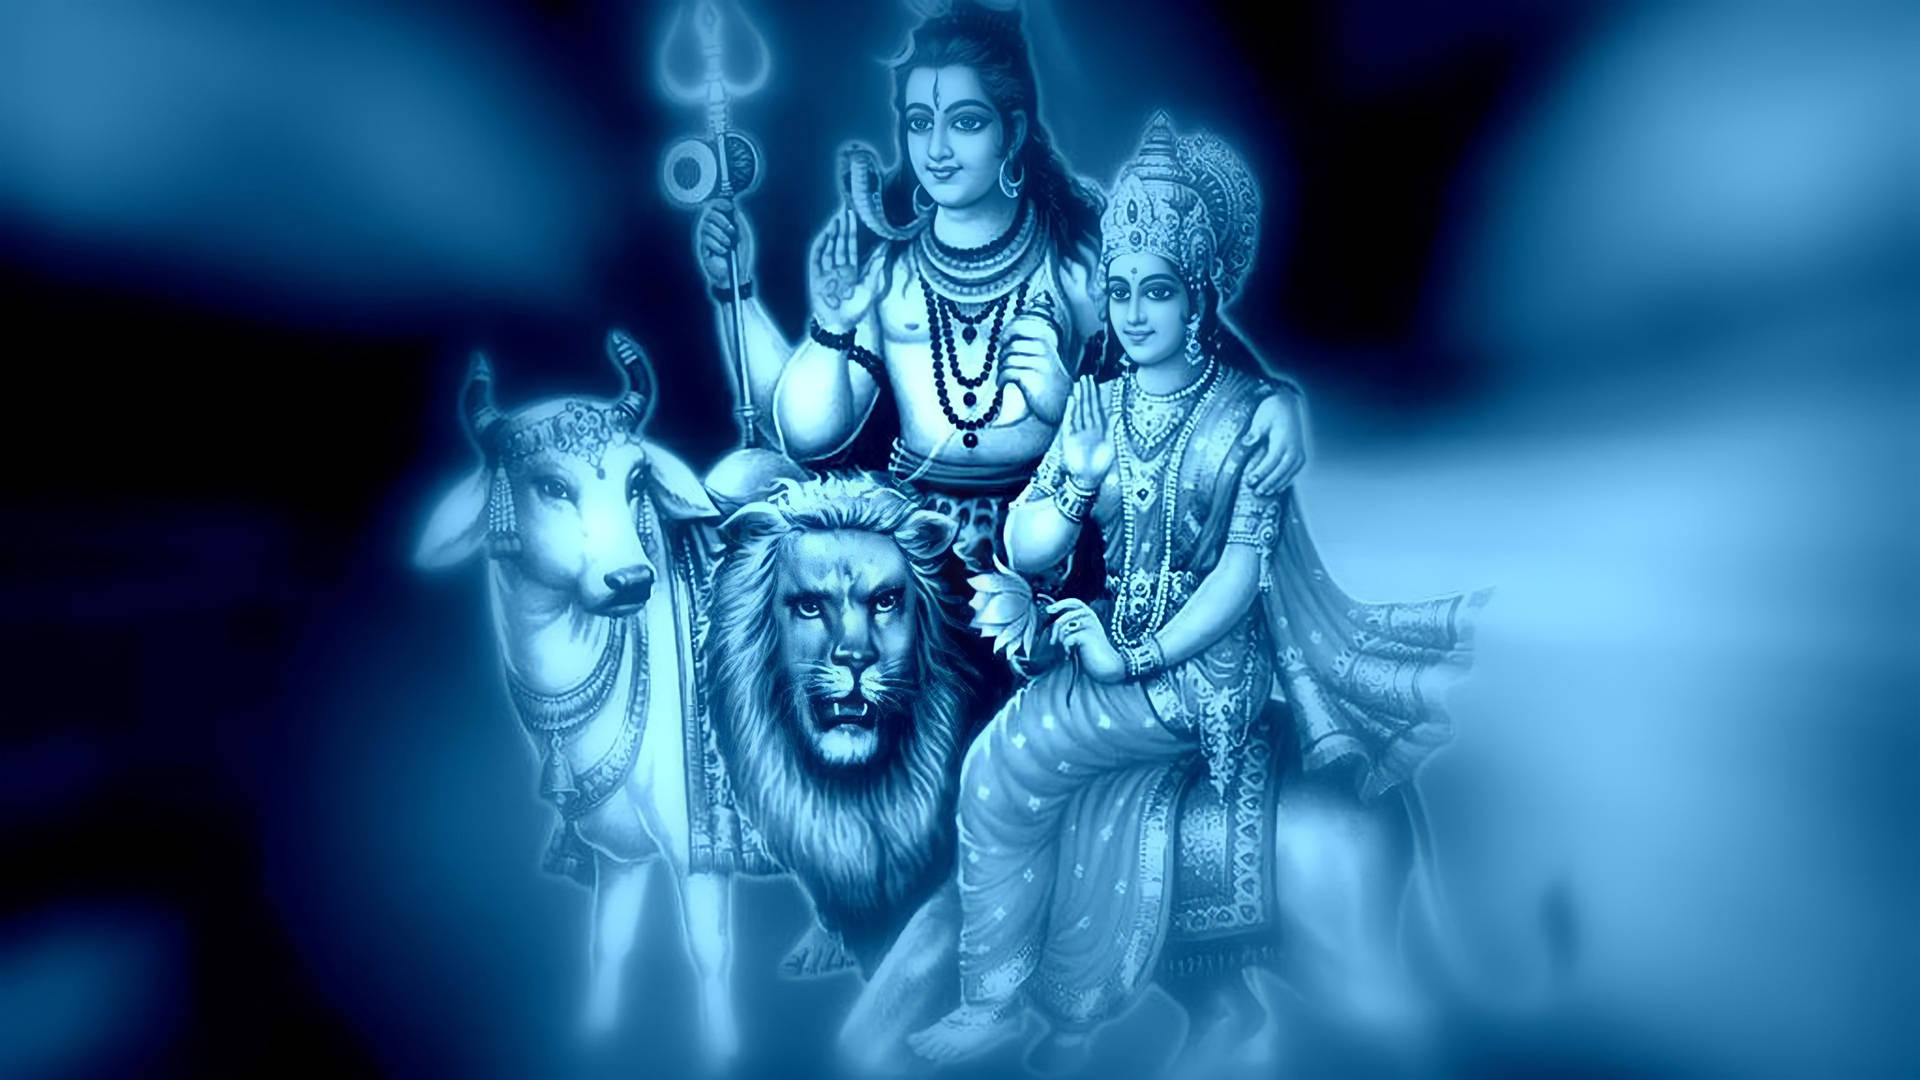 Shiv Parvati Hd Blue-themed Poster Background